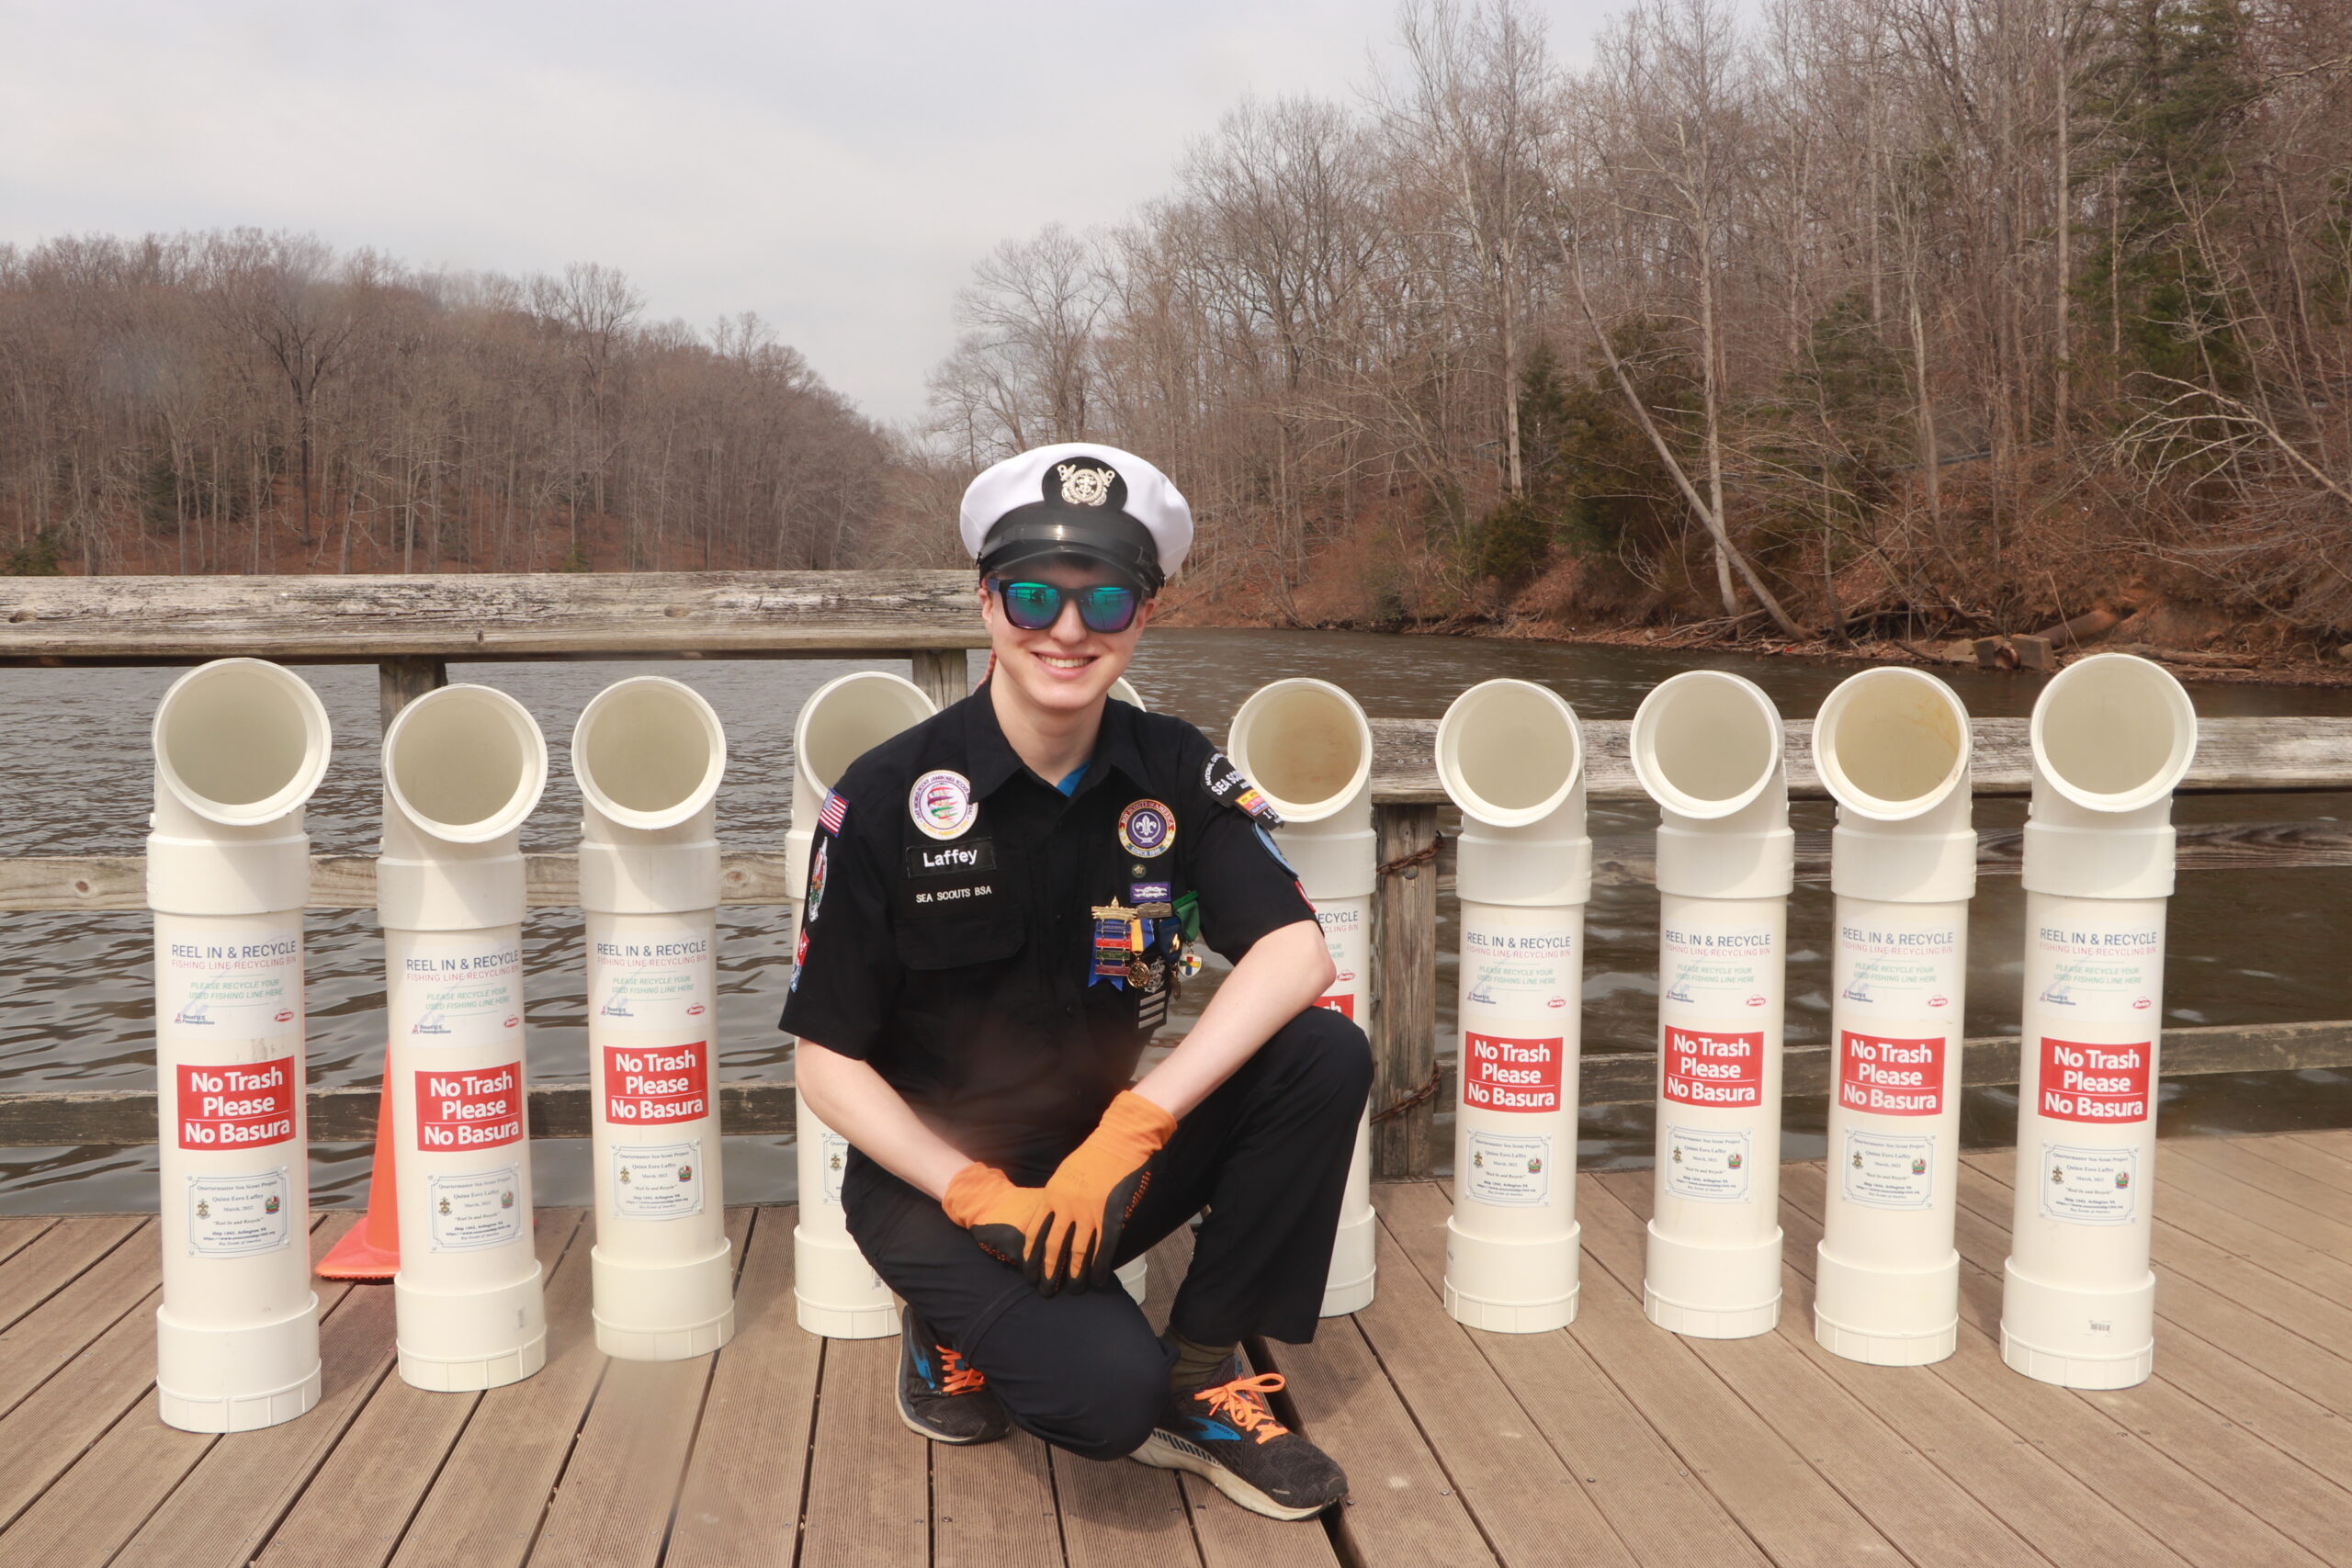 Sea Scout’s project sheds light on the importance of proper fishing line disposal